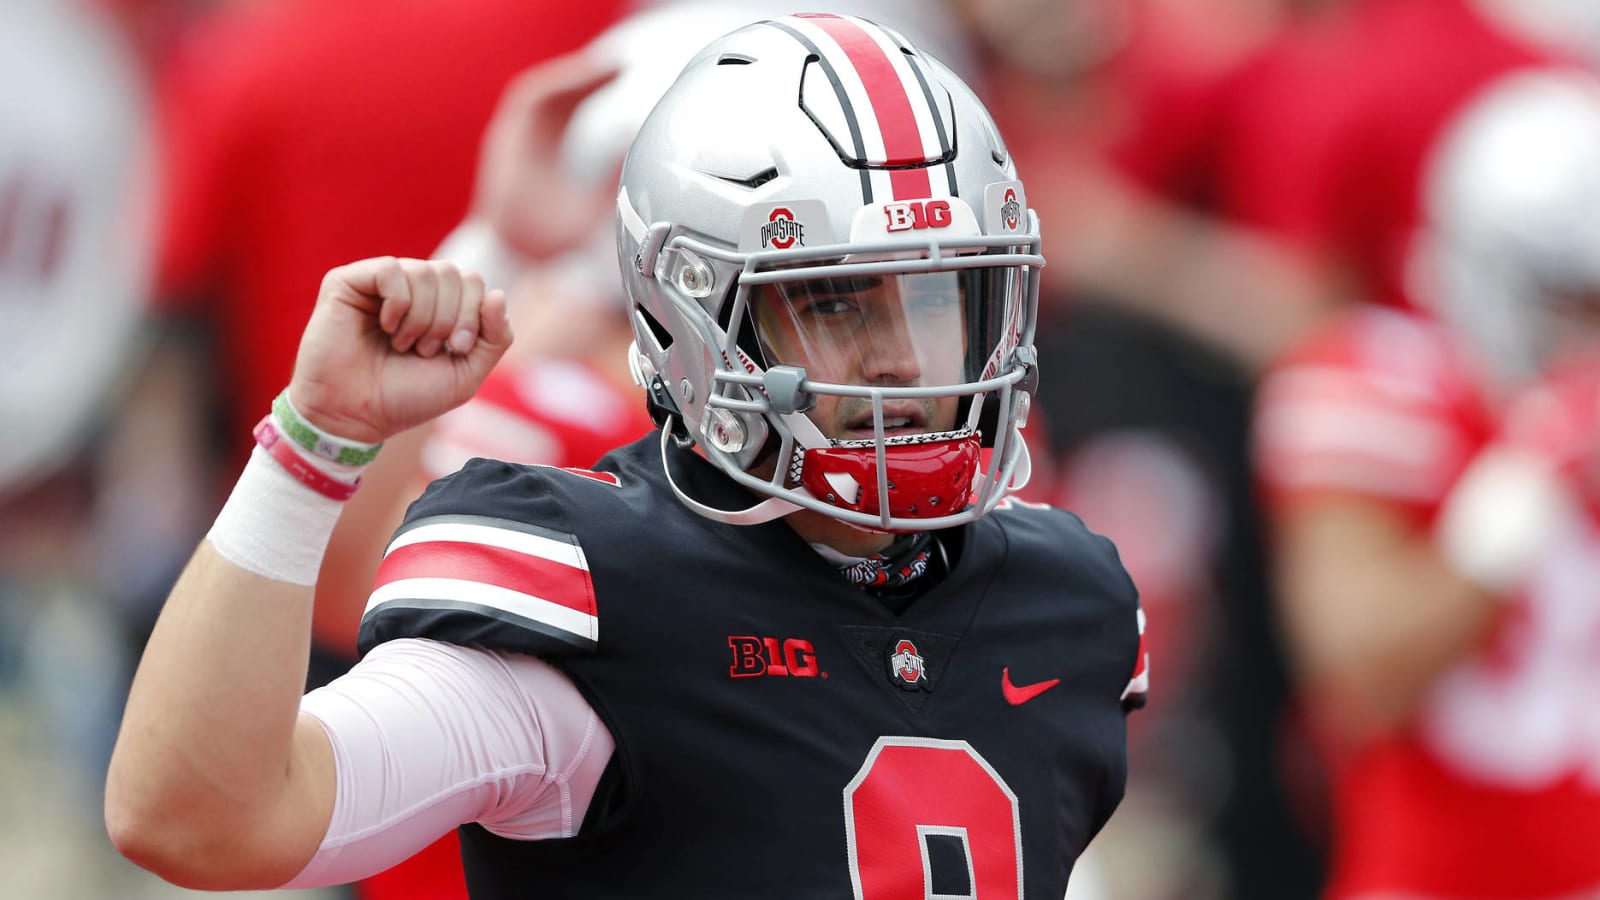 OSU's Jack Miller reinstated after OVI charge is reduced